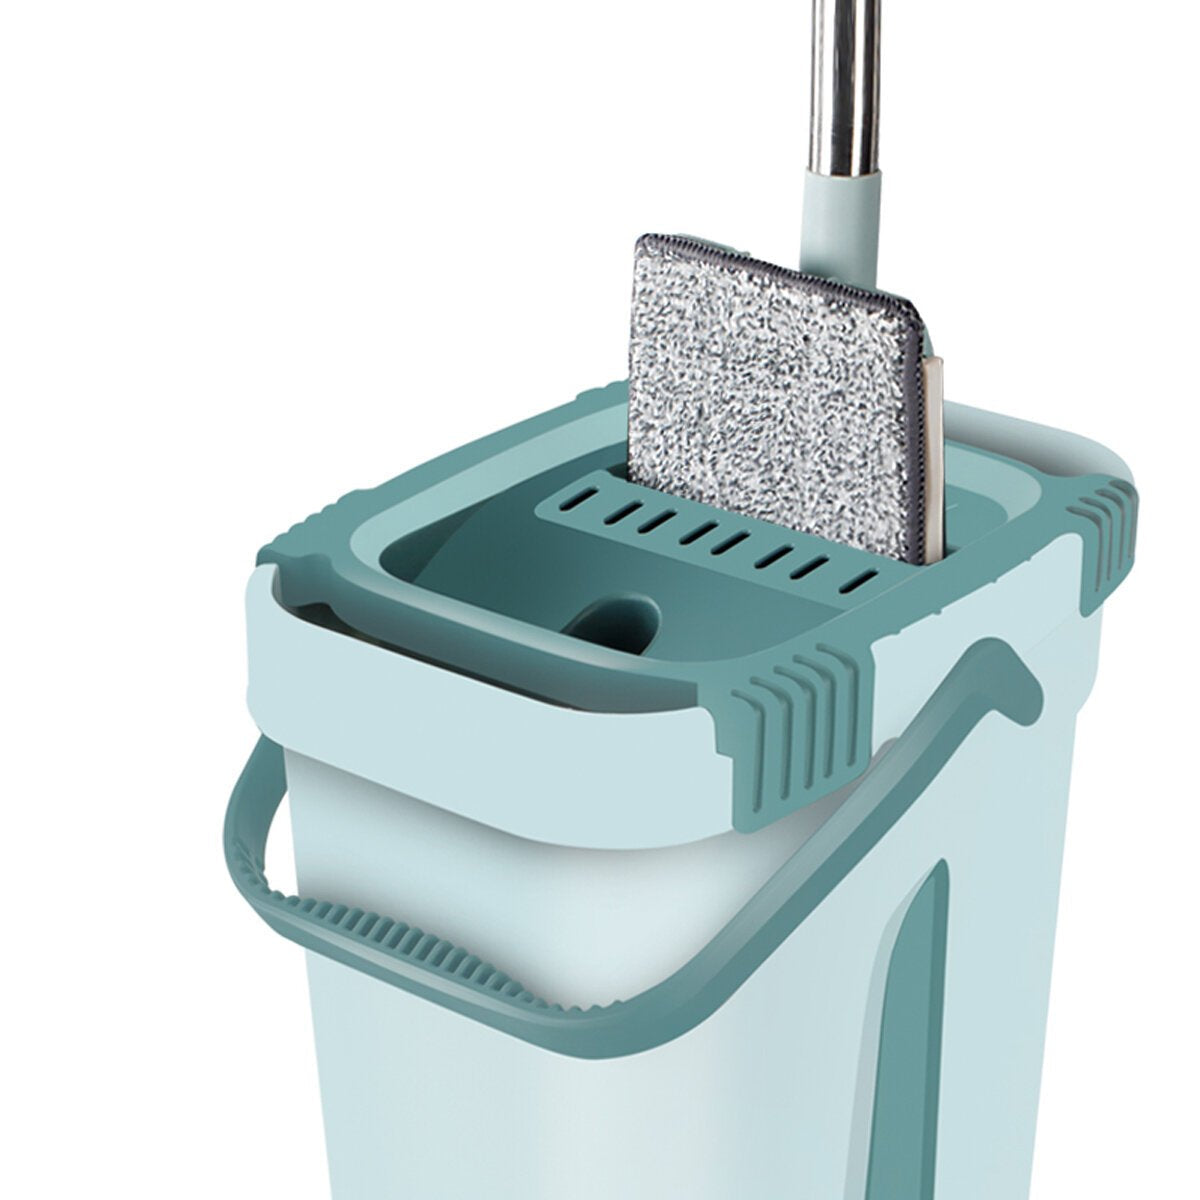 Flat Squeeze Mop and Bucket Wet / Dry Floor Cleaning with 2 Microfiber Pads